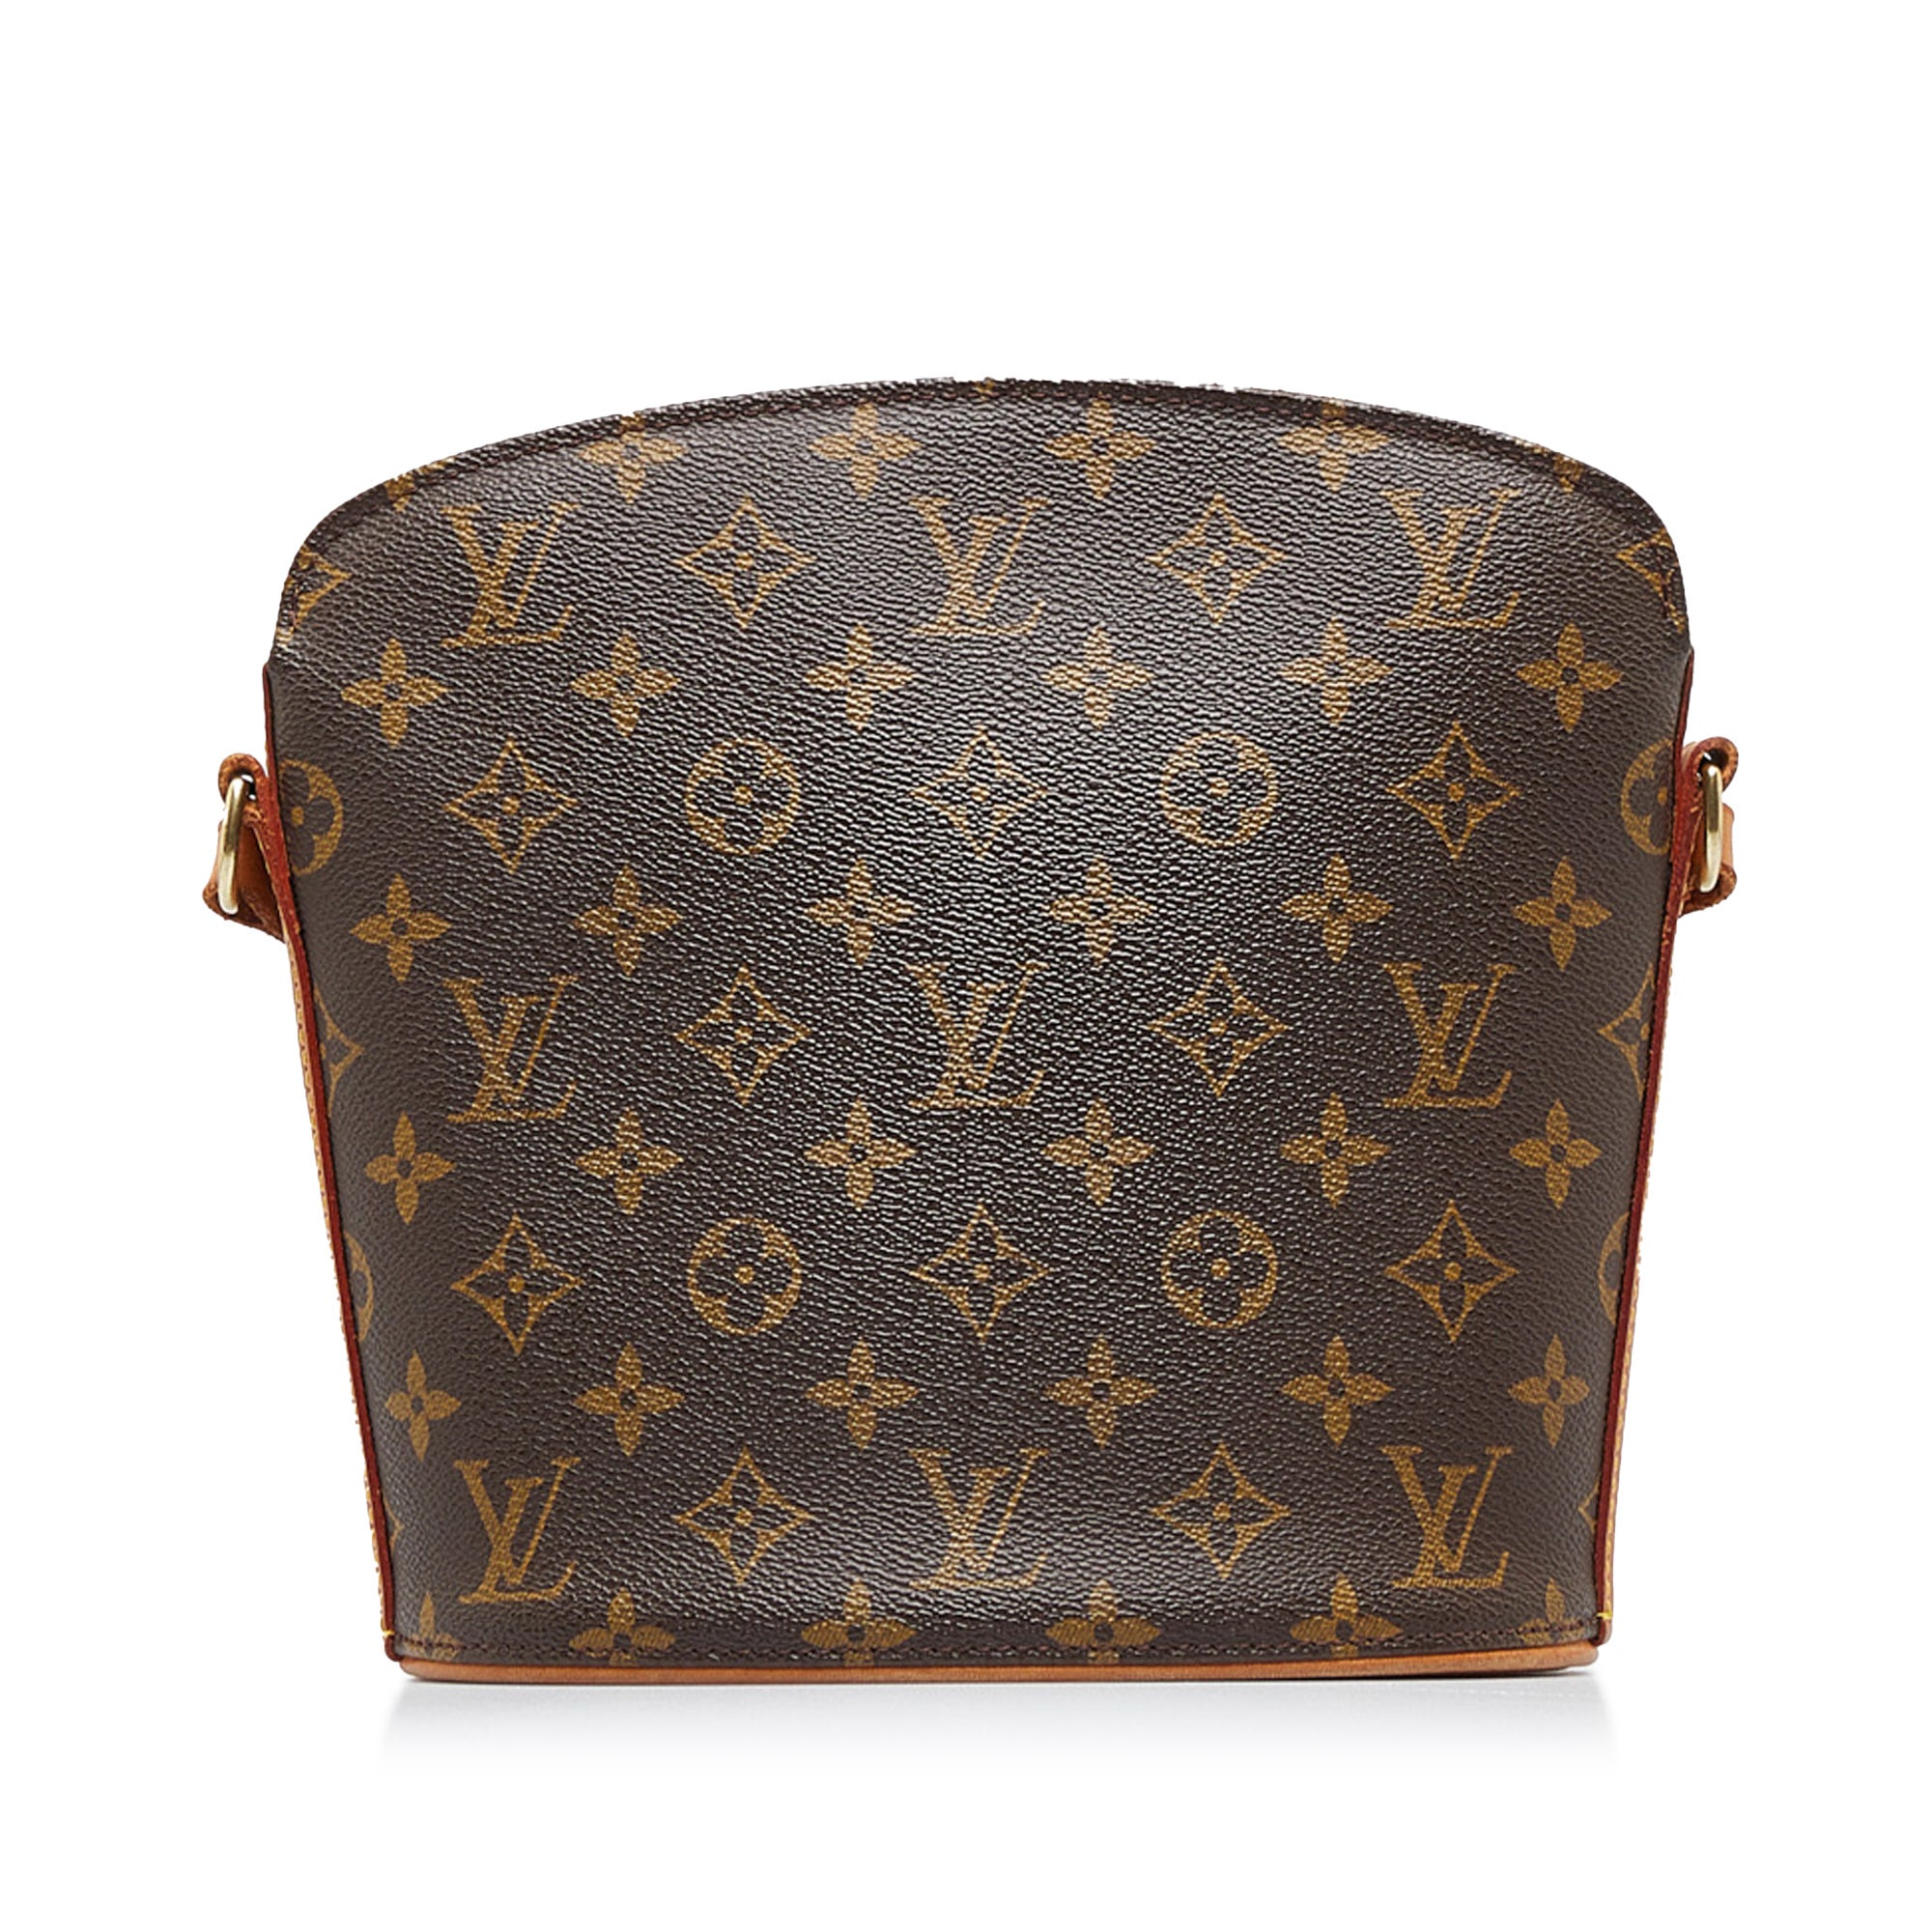 Louis Vuitton - Authenticated Drouot Handbag - Synthetic Brown for Women, Very Good Condition